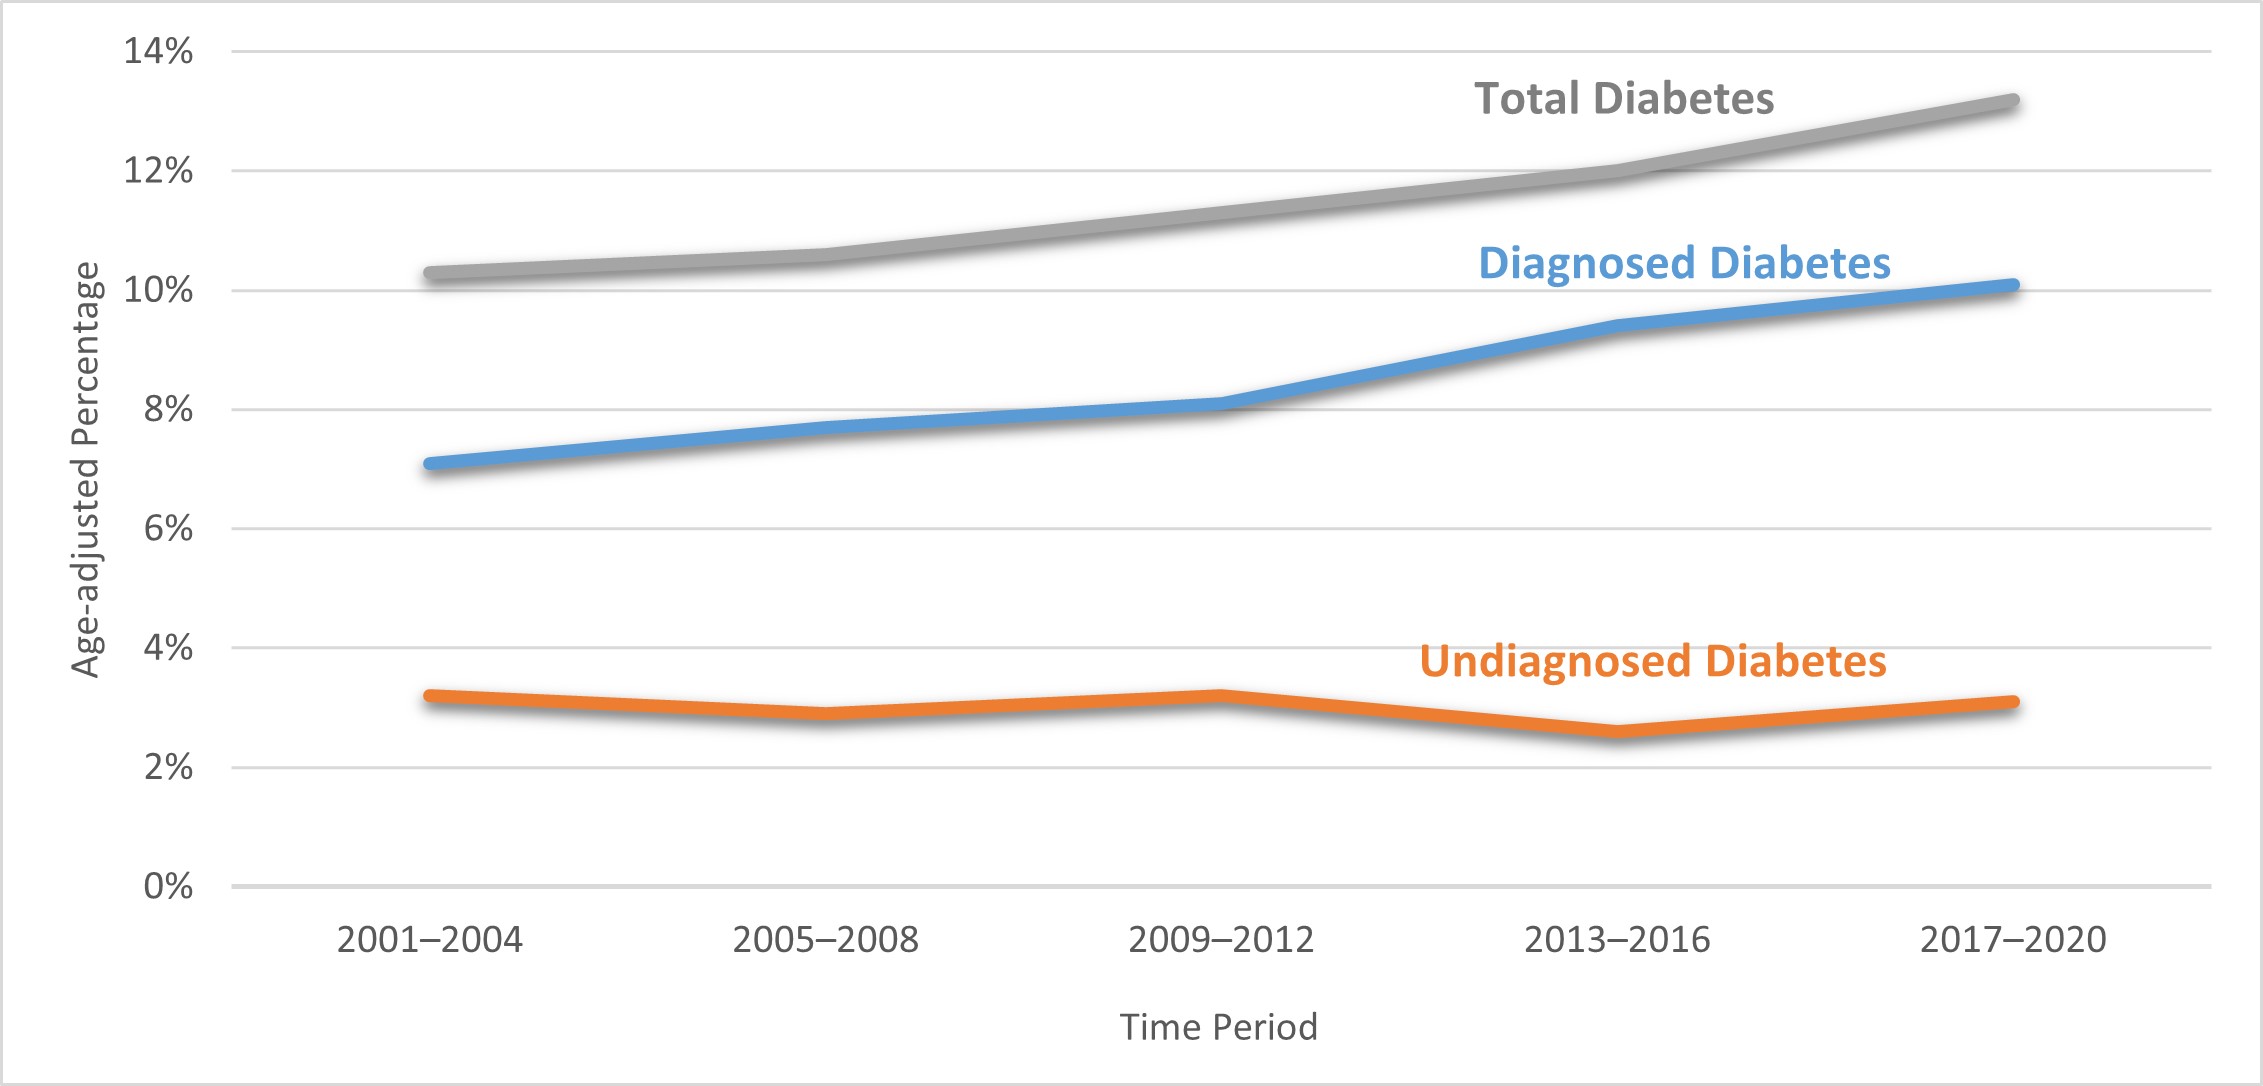 This horizontal line graph uses 3 lines to show the prevalence trends of diagnosed diabetes, undiagnosed diabetes, and total diabetes among US adults aged 18 years or older from 2001 to 2020. The vertical Y-axis presents percentages from 0% to 14% in increments of 2. The horizontal X-axis presents the time period in 2-year spans. Prevalence of diagnosed diabetes and total diabetes increased in time. Prevalence of undiagnosed diabetes remained steady.